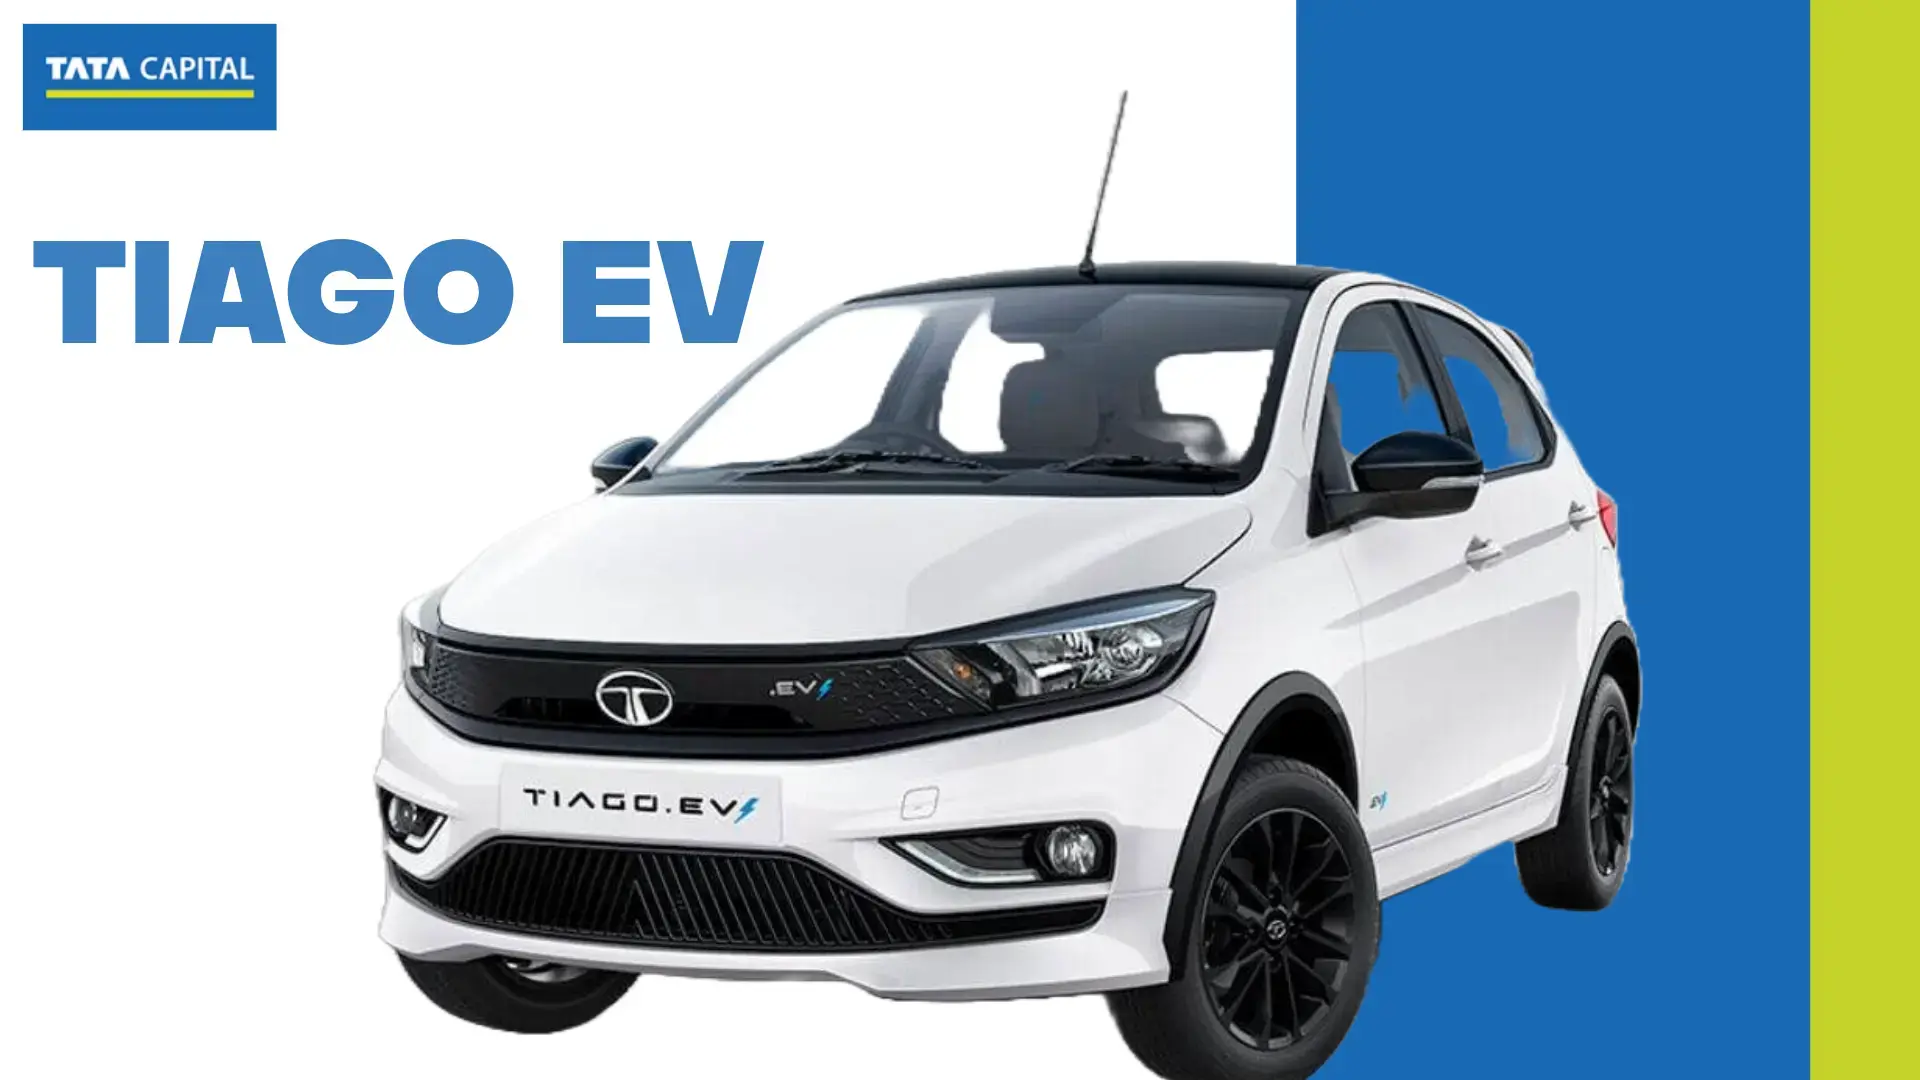 Tata Tiago EV: Electrifying Performance and Features